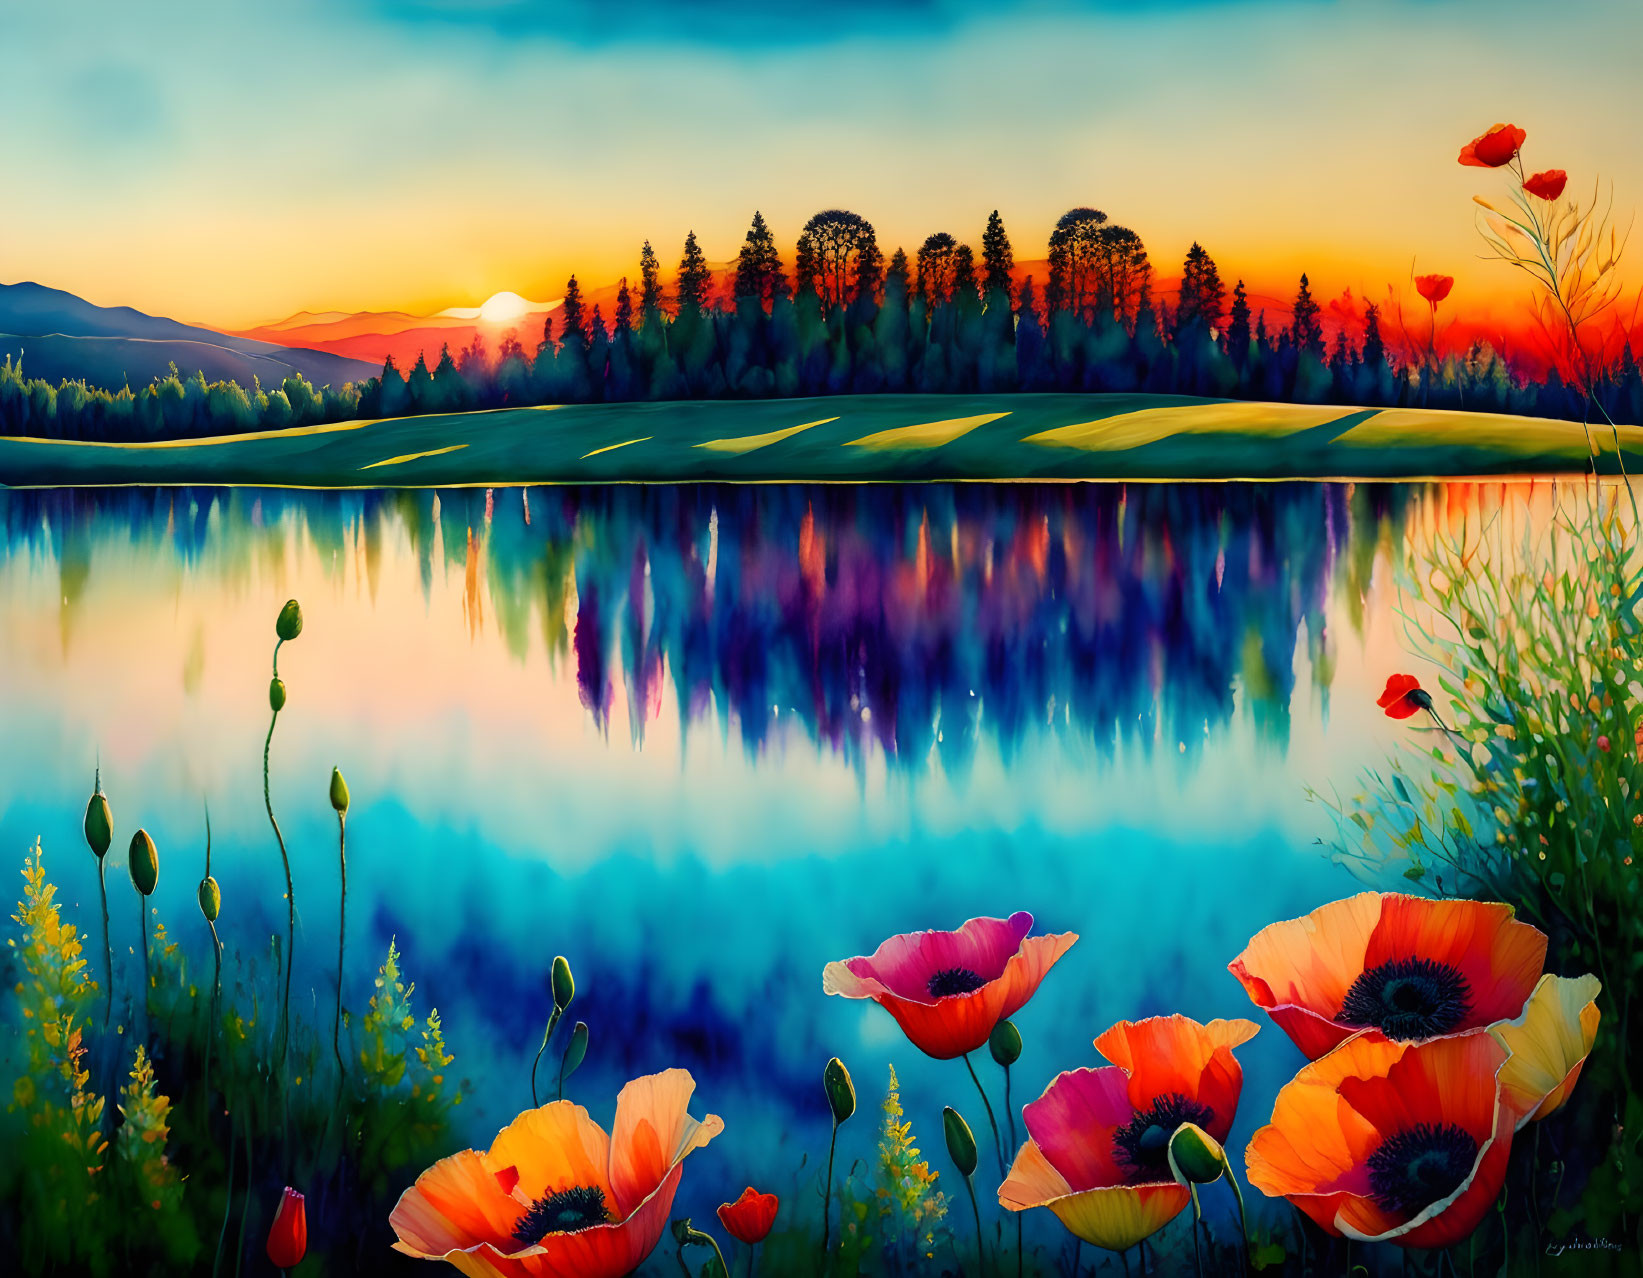 Colorful landscape painting: red poppies, blue lake, sunset, silhouetted trees